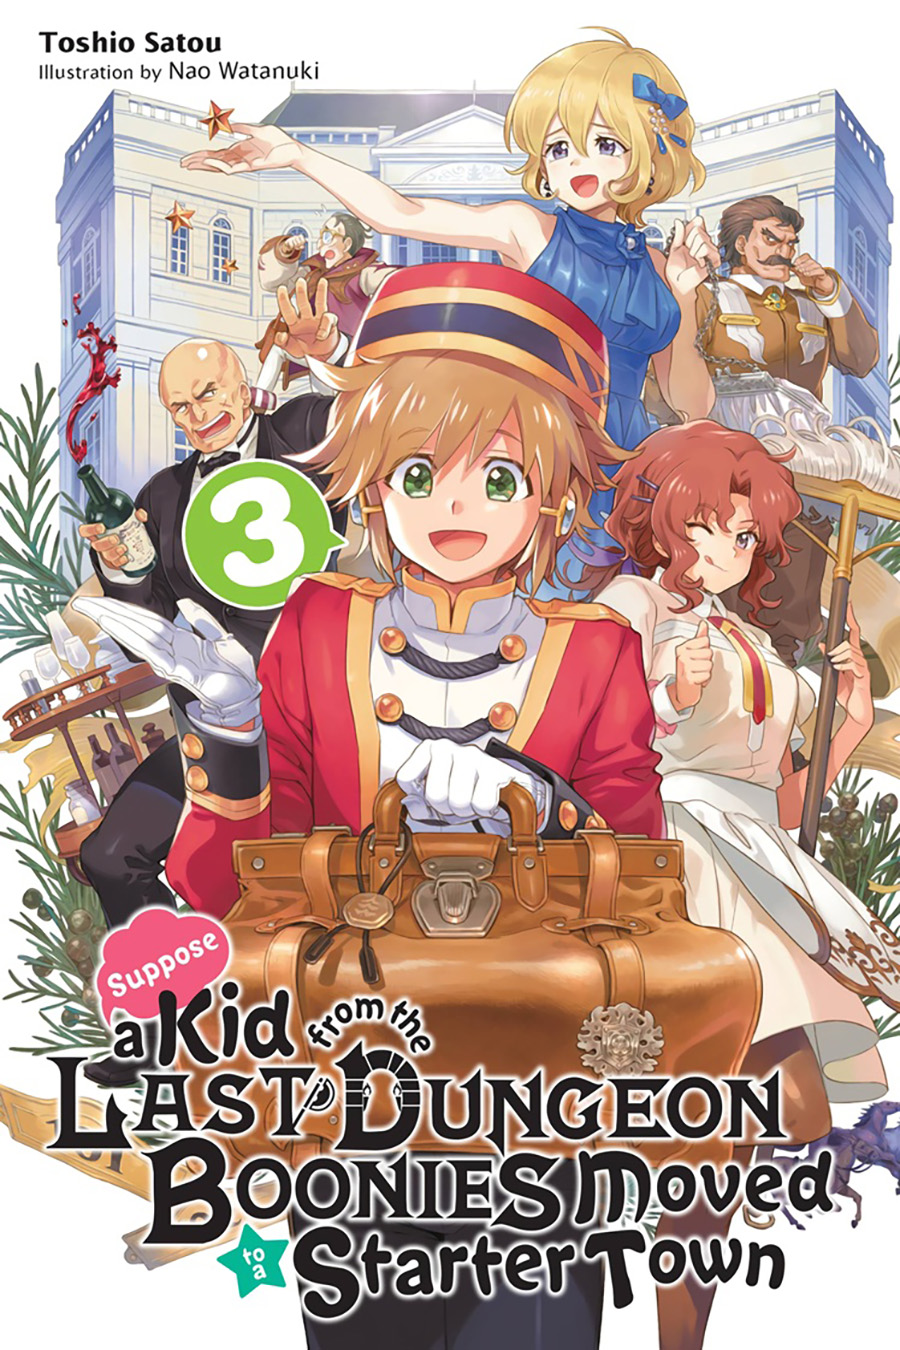 Suppose A Kid From The Last Dungeon Boonies Moved To A Starter Town Light Novel Vol 3